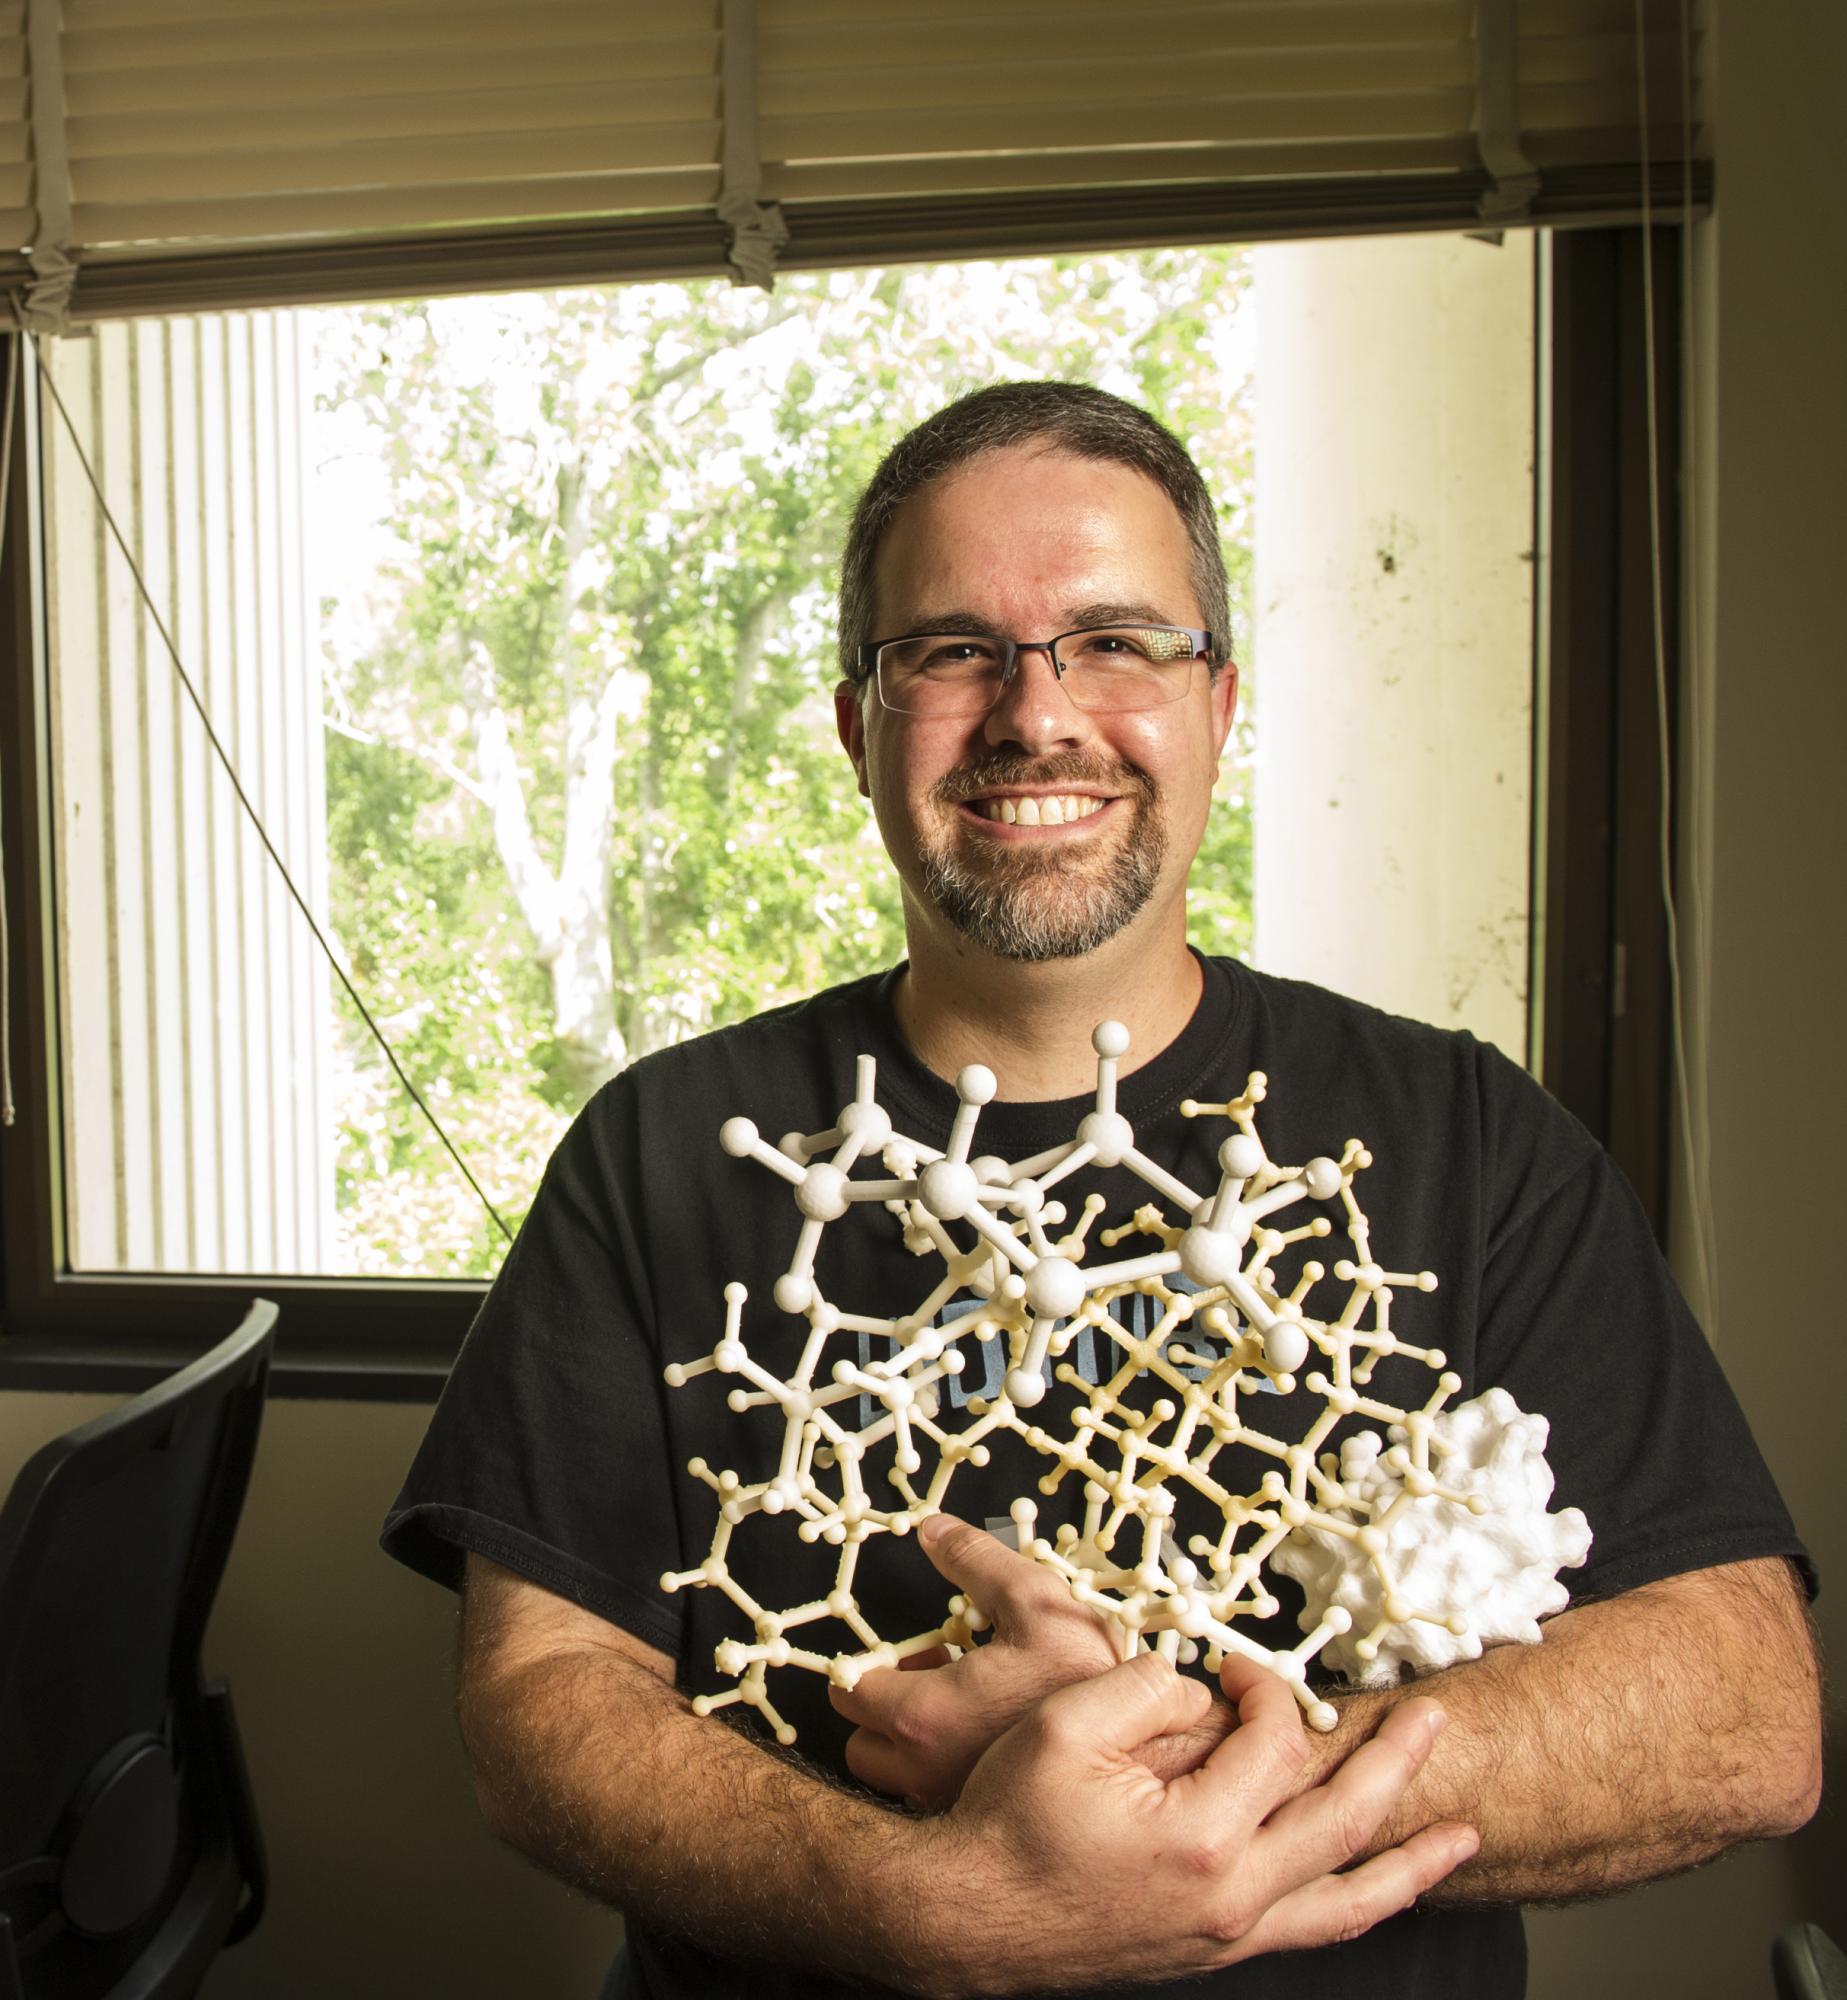 A male profesor holds 3-D models used in chemistry